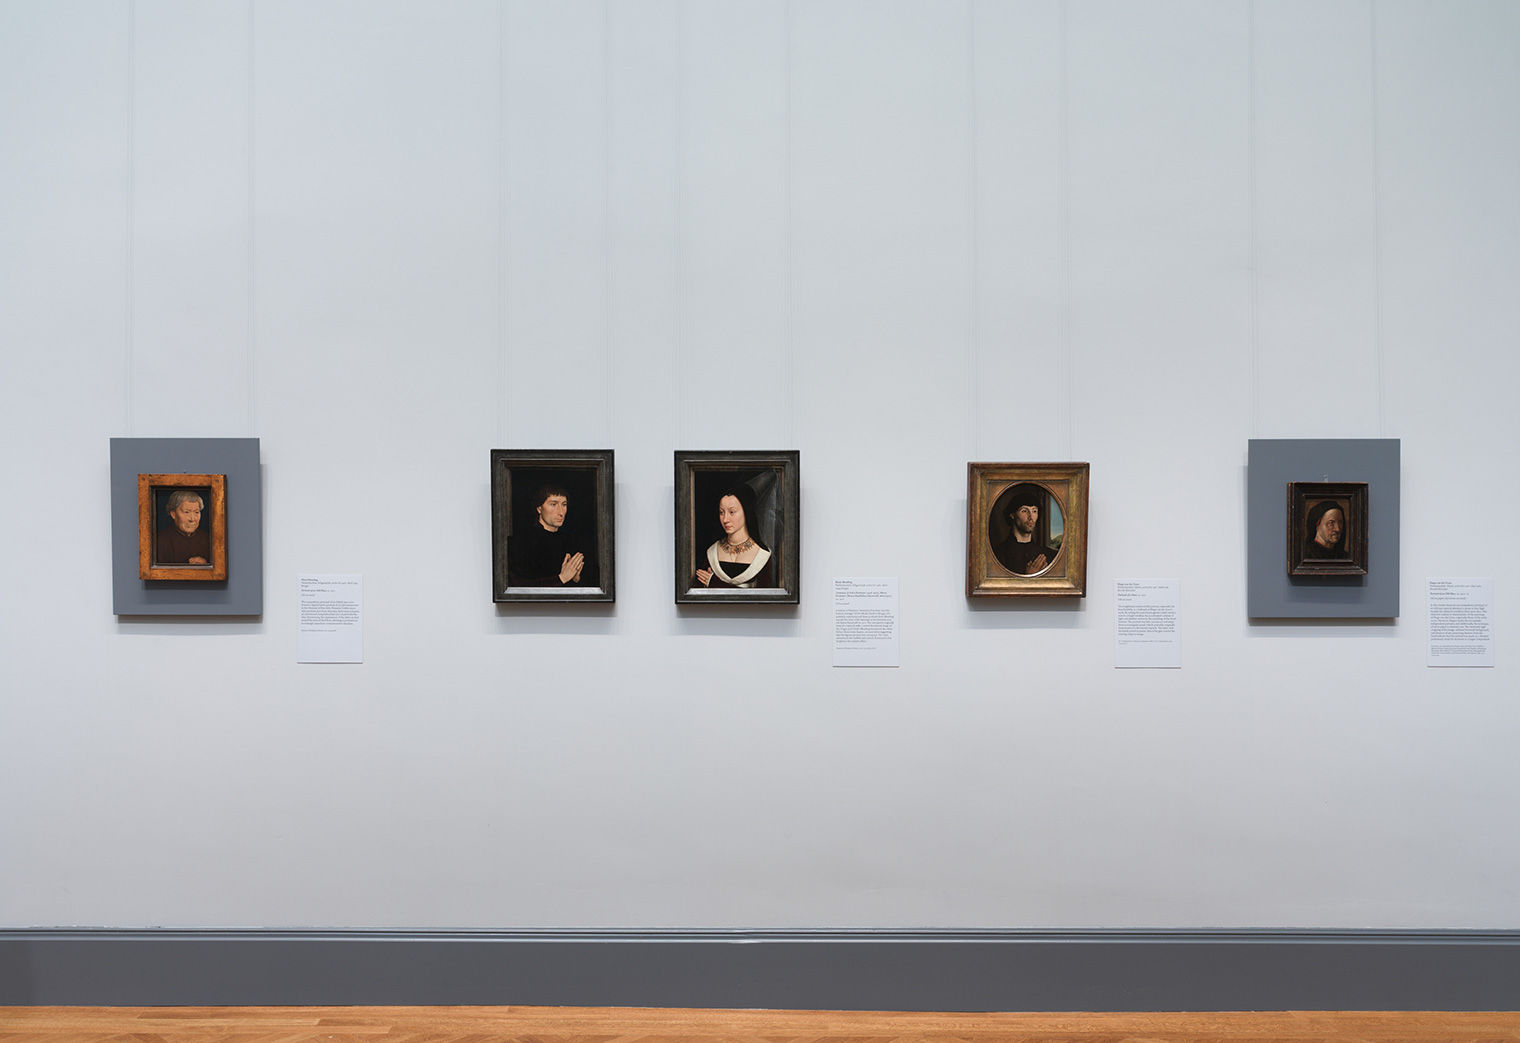 Five portraits hanging in the “Faces of the Renaissance” gallery in European Paintings, 1300-1800. The paintings are lit from above, and the wall behind them is painted a light blue-gray.